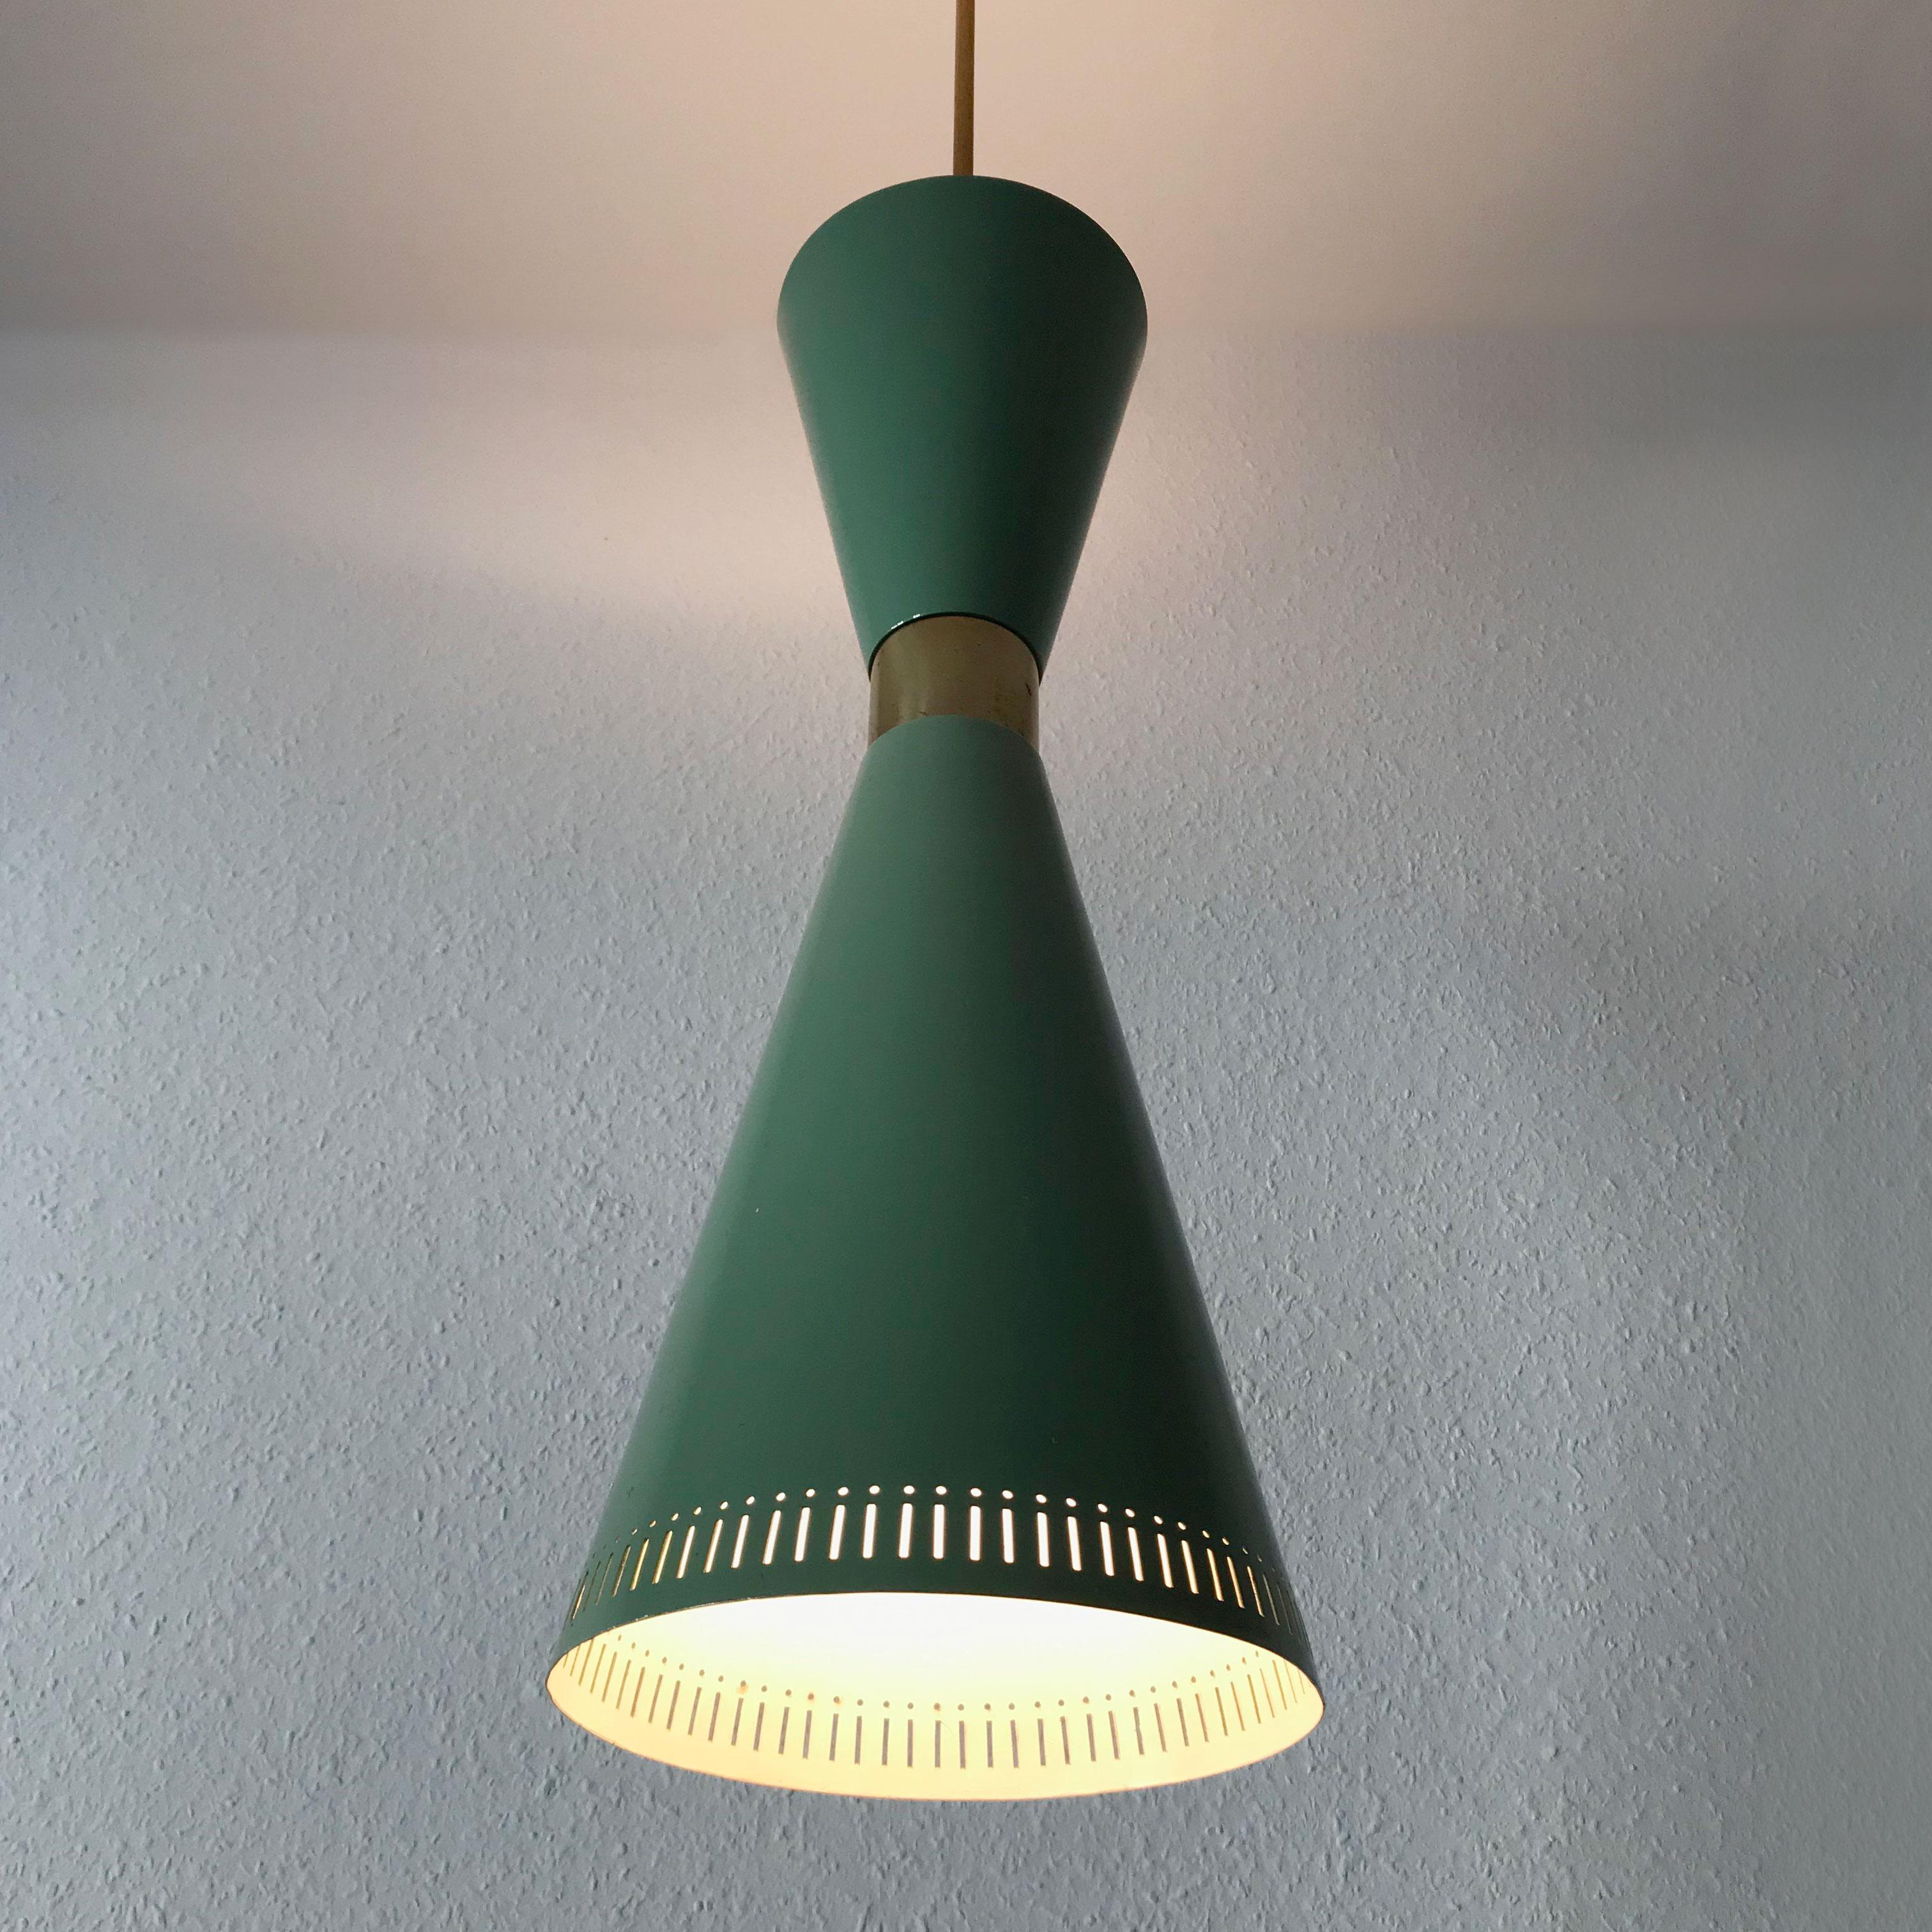 Extremely rare and large diabolo or hour glass pendant lamp with perforated aluminum shade in green color. Manufactured probably by BAG Turgi, 1950s, Switzerland. 

Executed in green lacquered aluminium and brass. The lamp needs 1 x E27 (bottom)